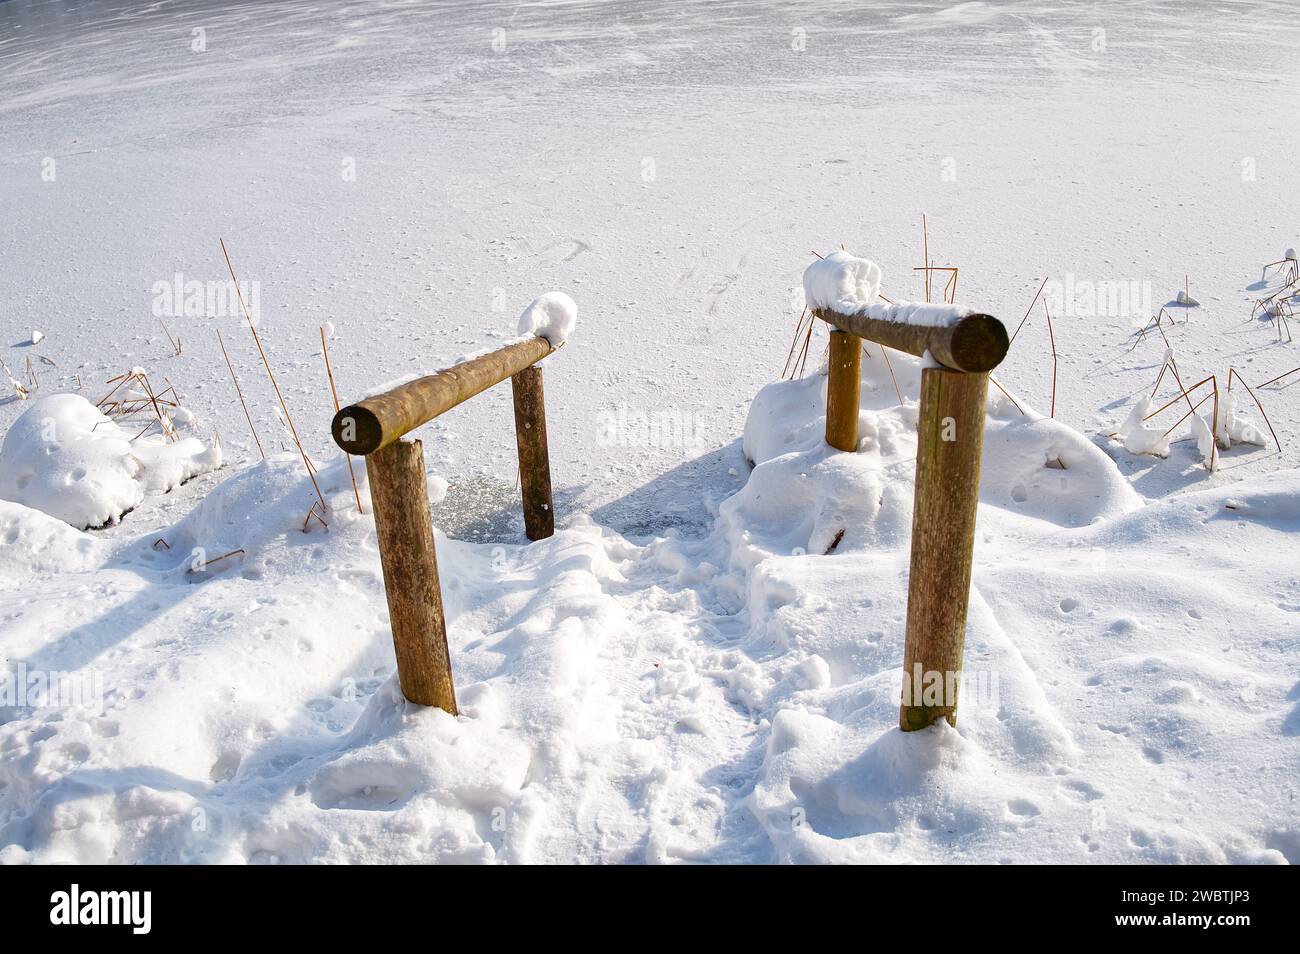 Wooden handrail between land and the frozen water of the lake in the forest under snow Stock Photo